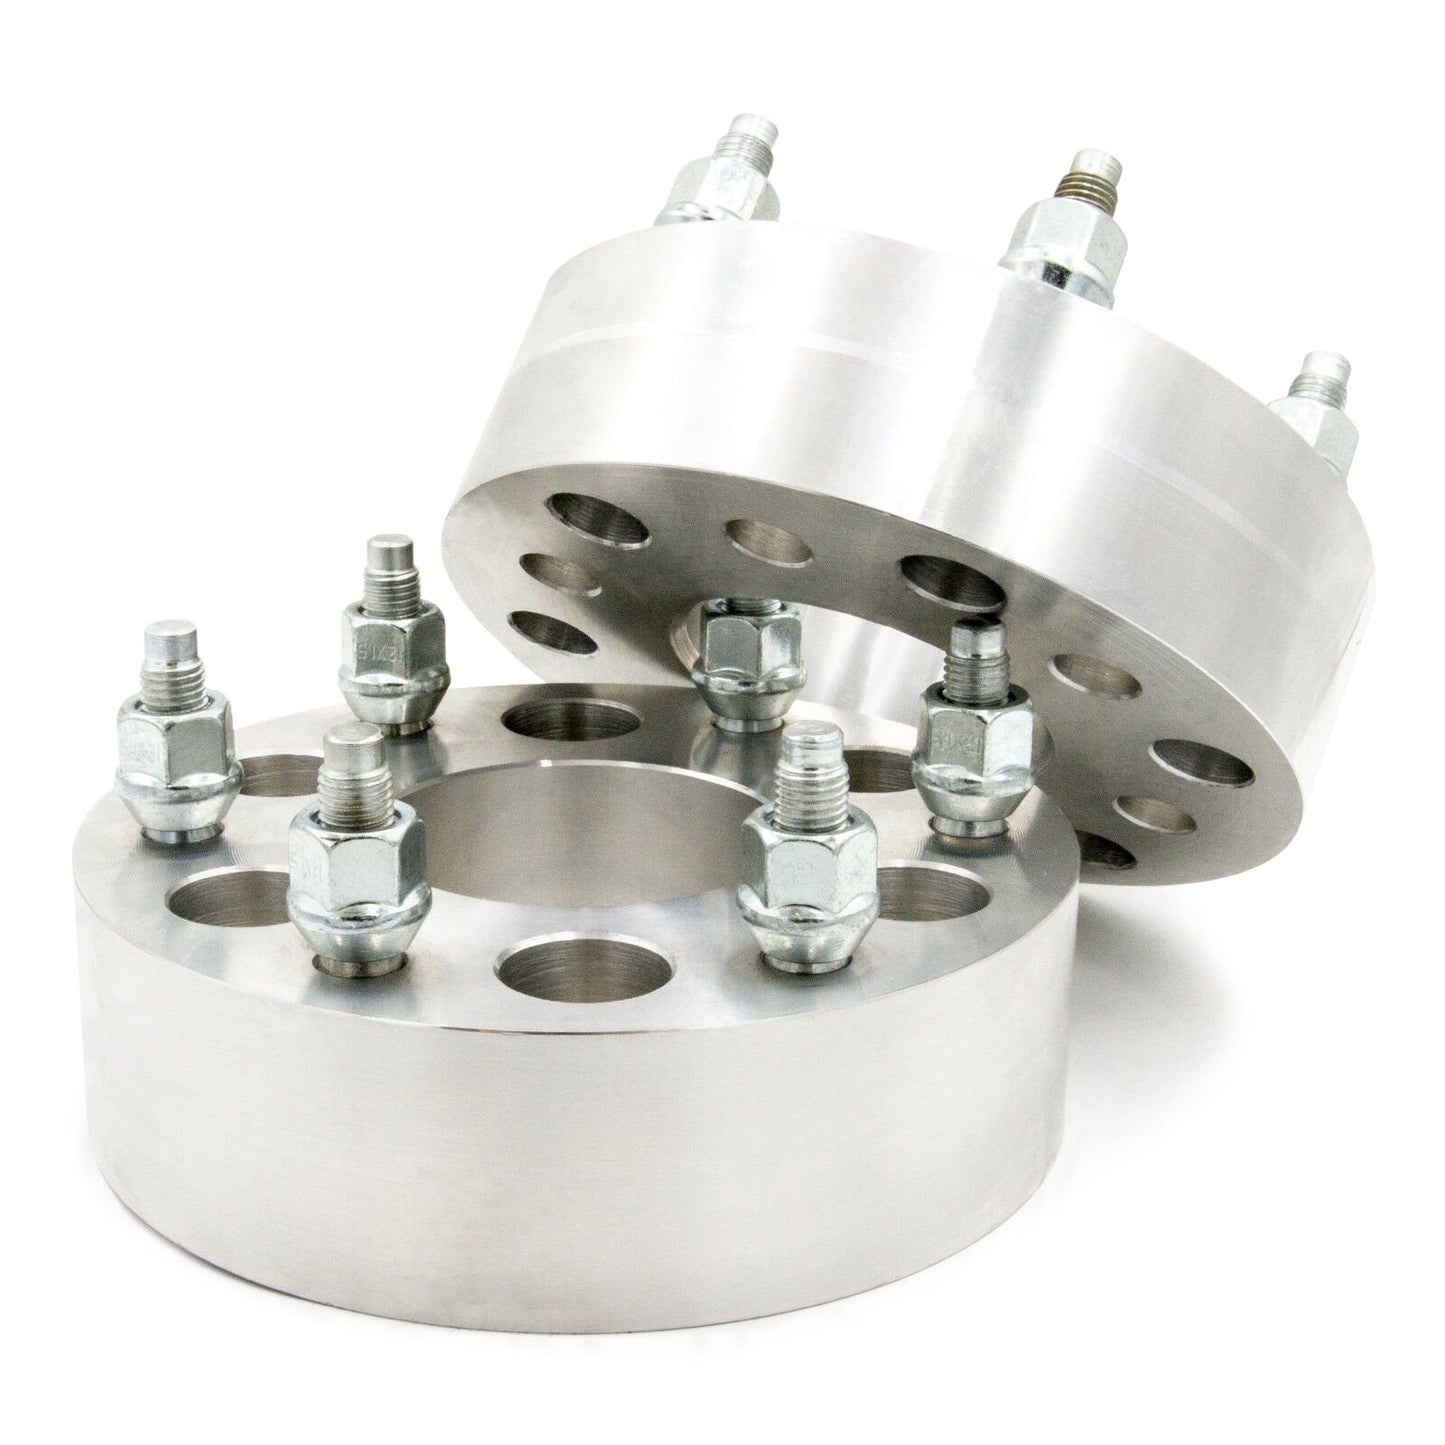 6x130 to 6x130 Wheel Spacer/Adapter - Thickness: 3/4"- 4"